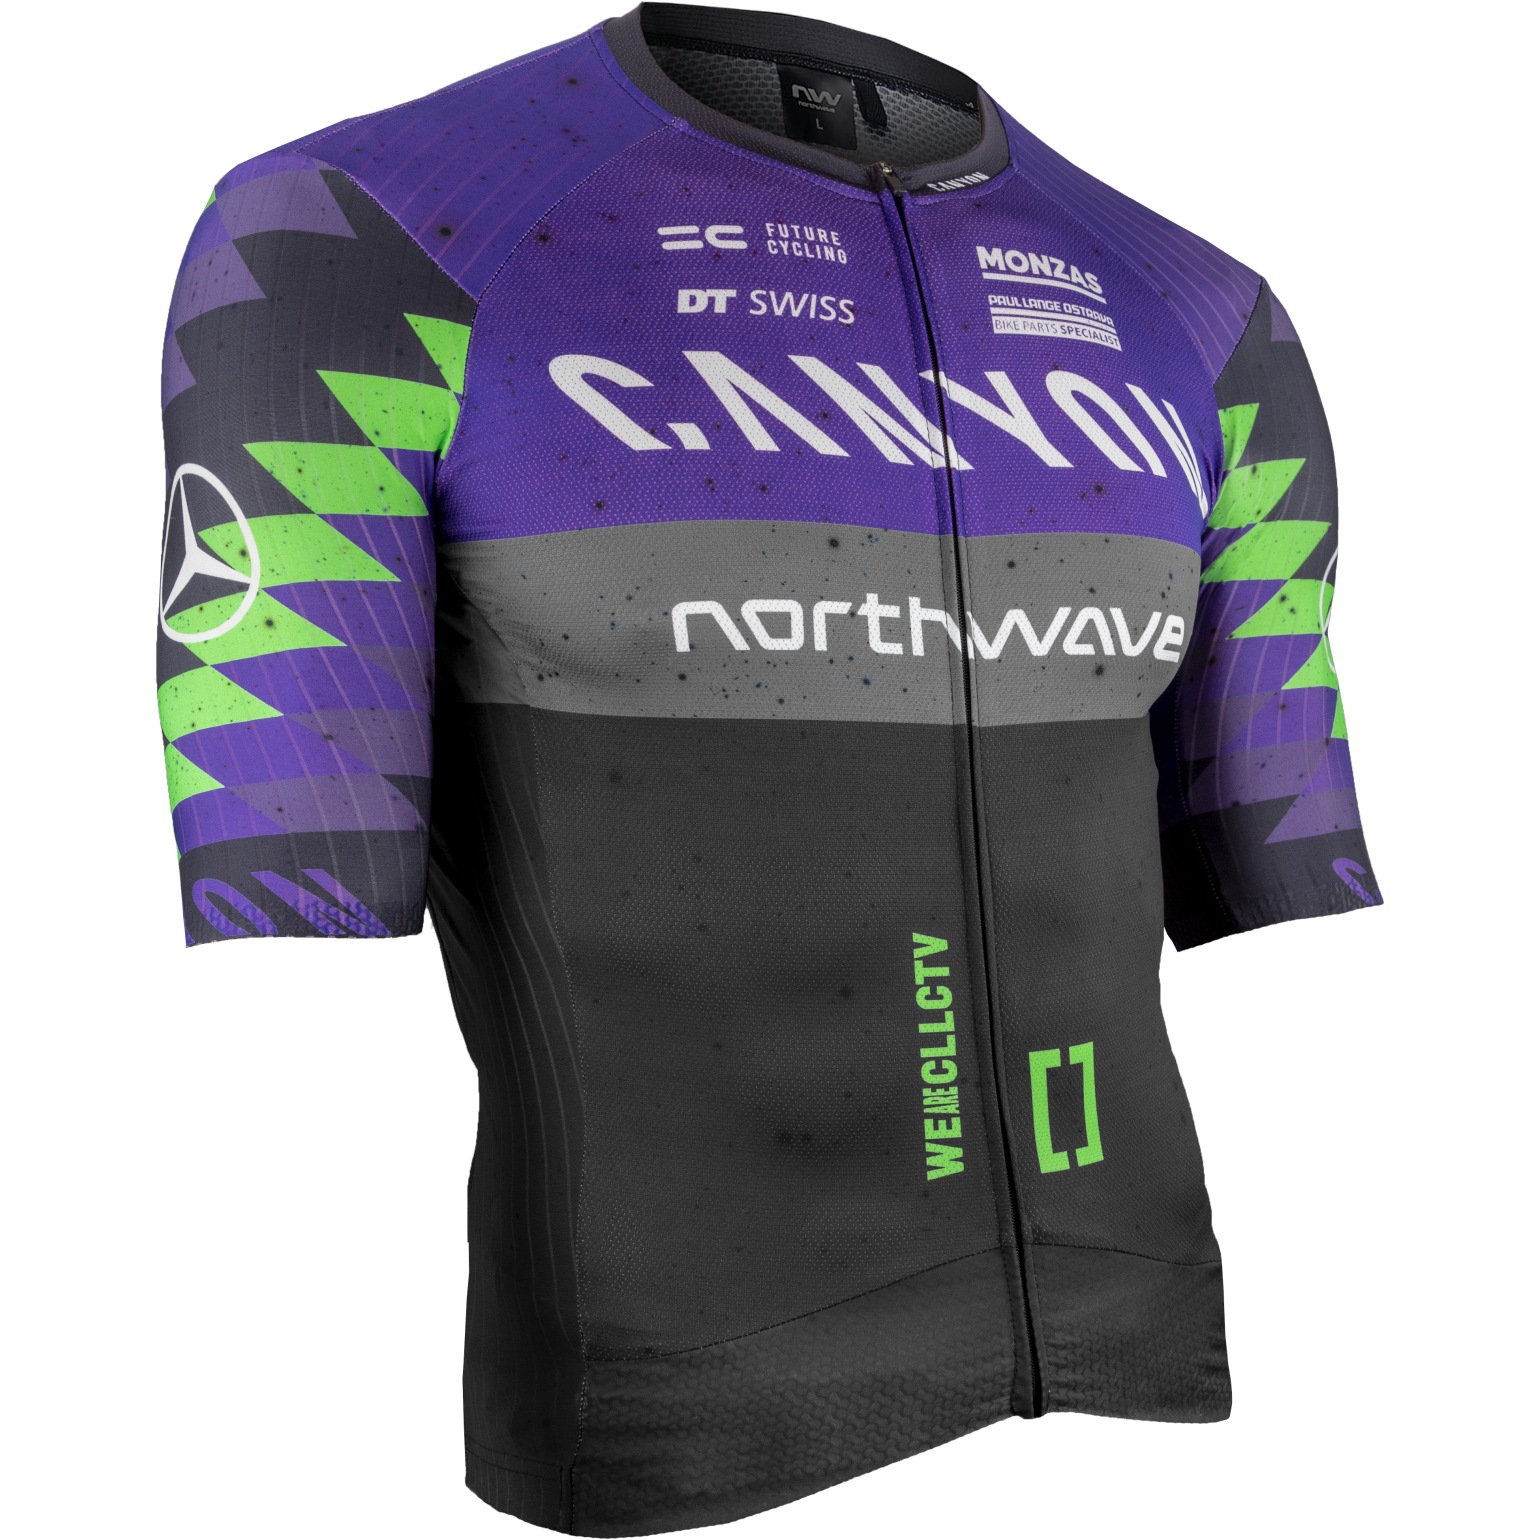 Picture of Northwave Pro Canyon Northwave Jersey Men - black/purple 06